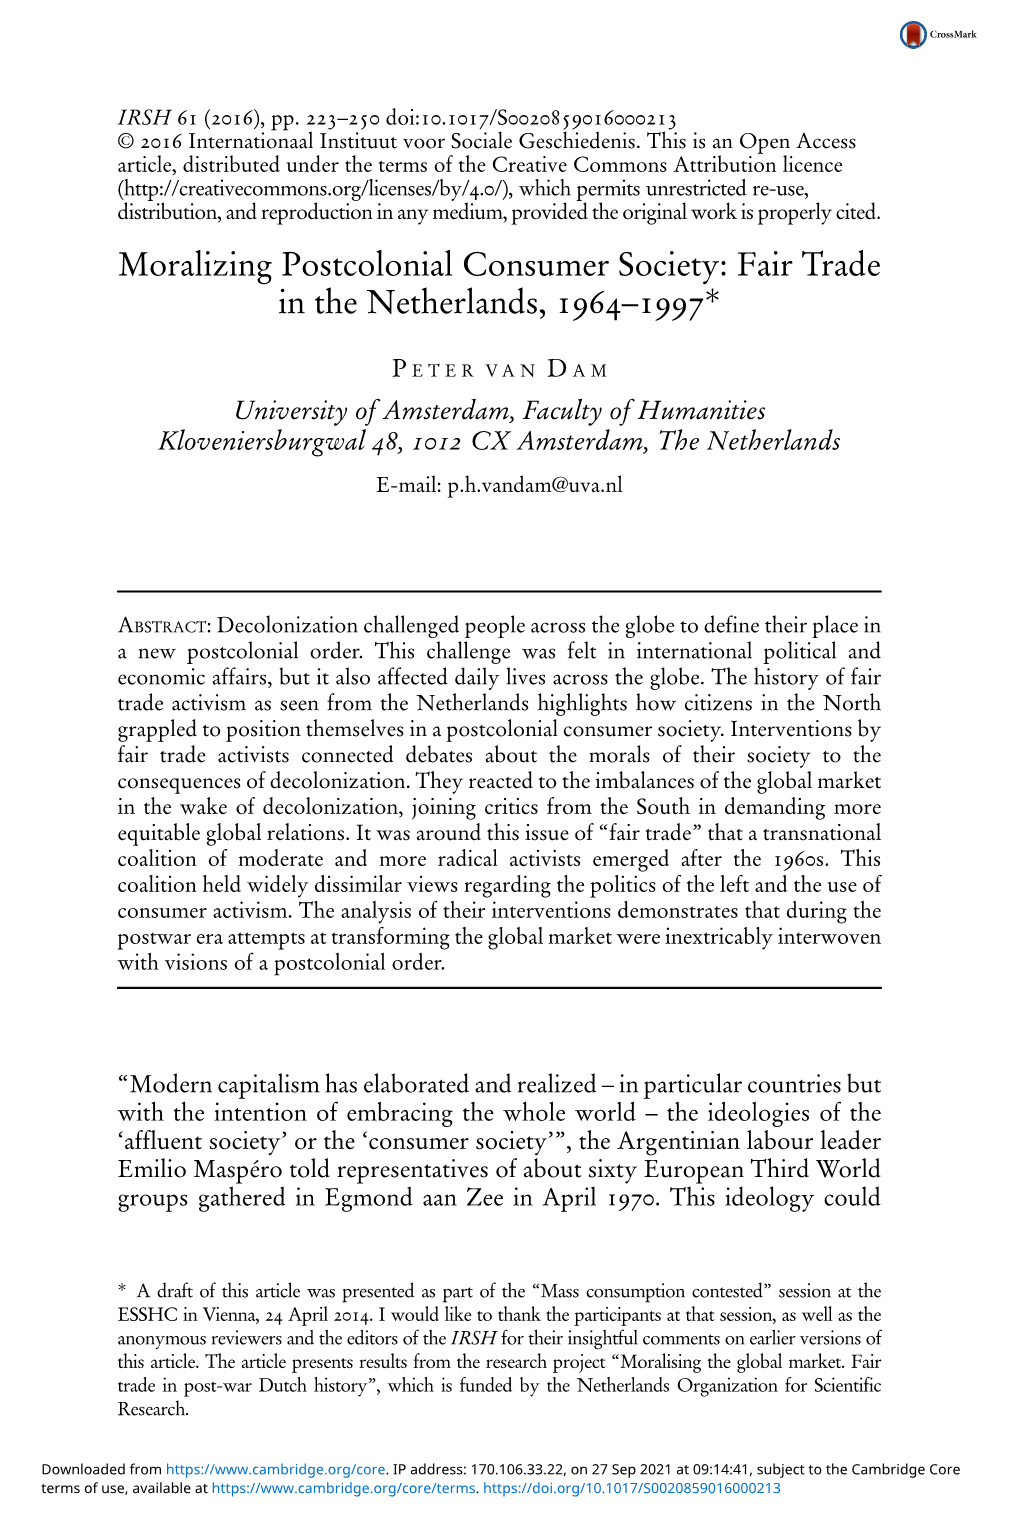 Moralizing Postcolonial Consumer Society: Fair Trade in the Netherlands, 1964–1997*